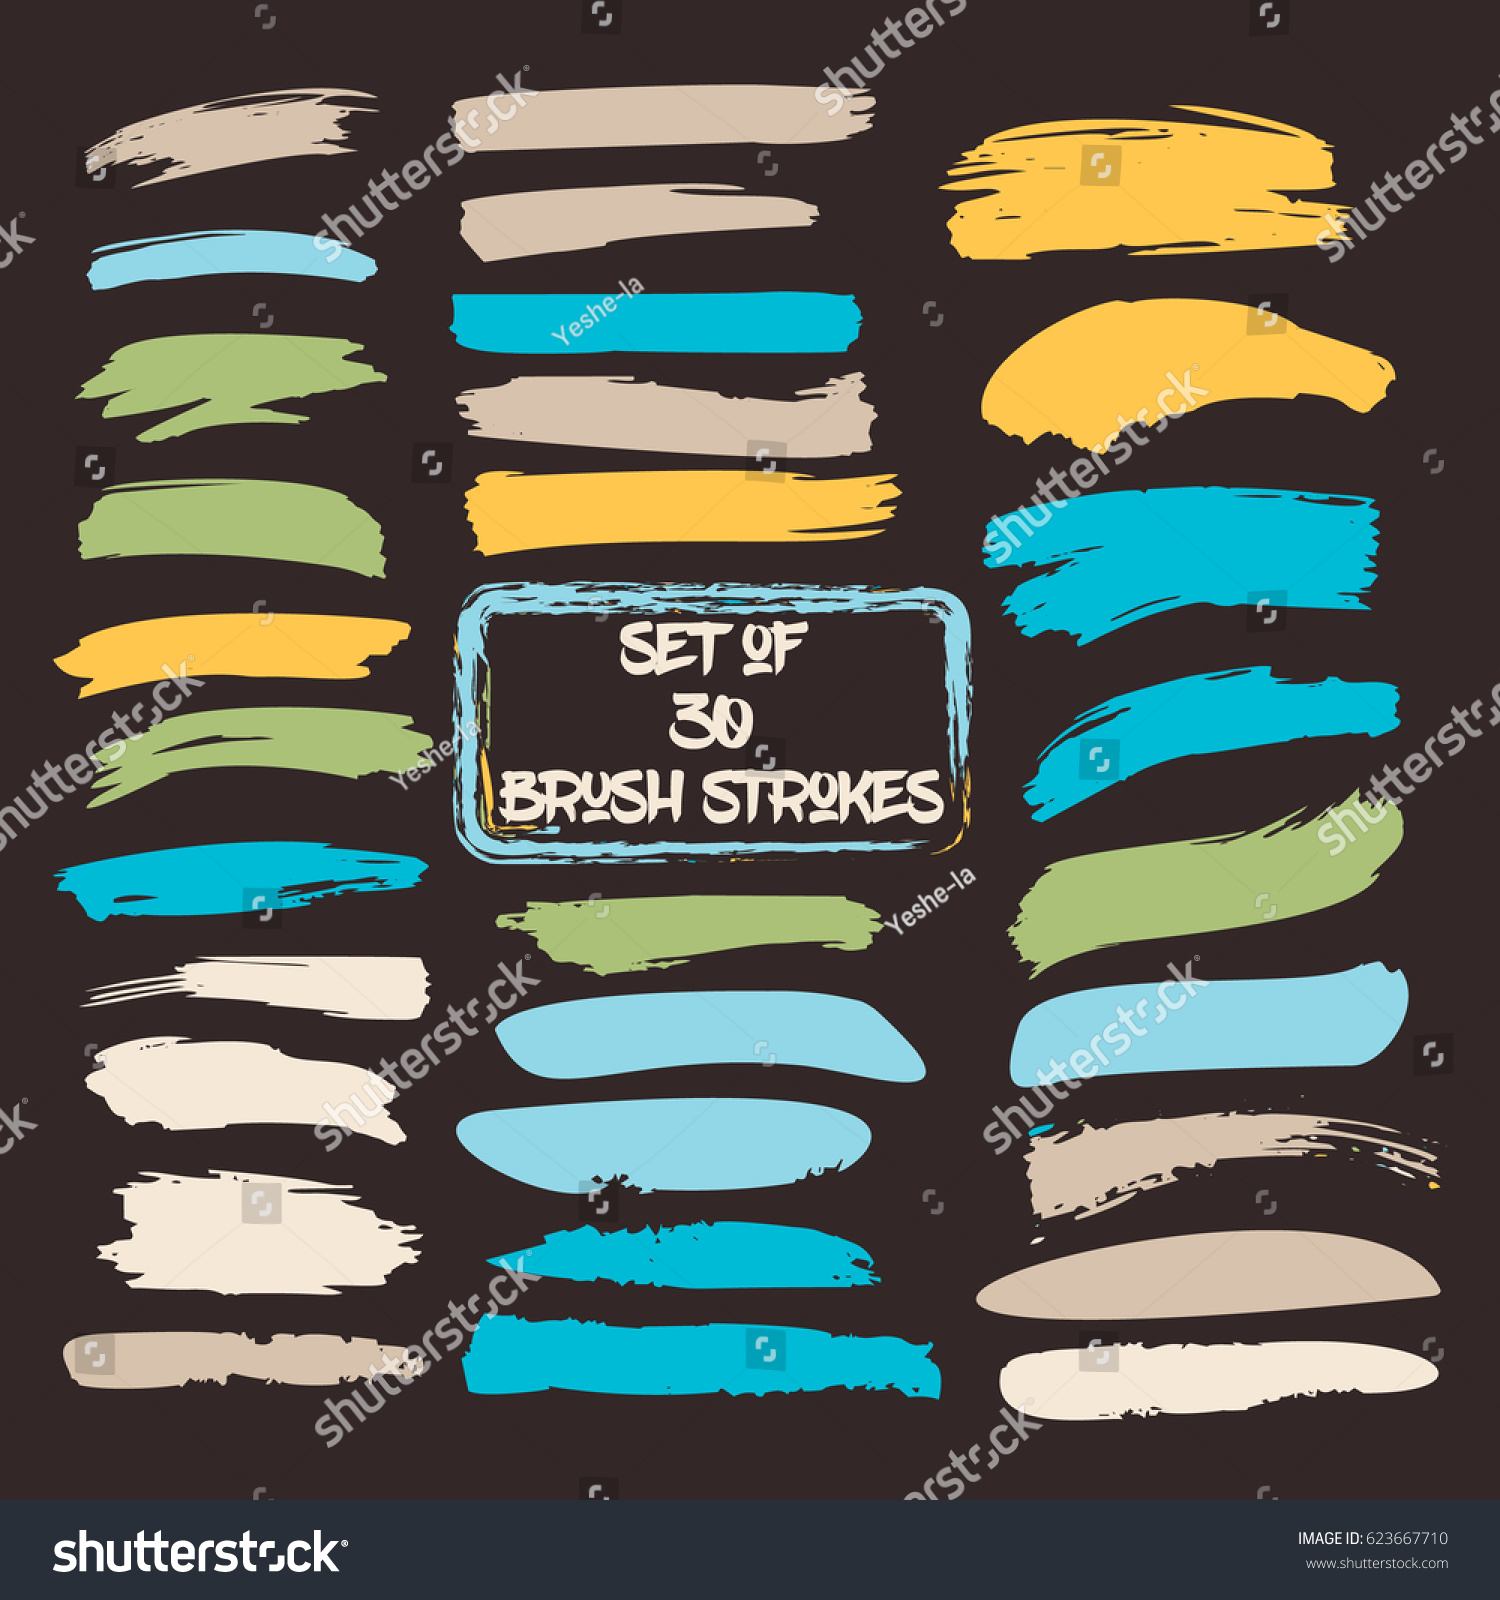 SVG of Set of thirty trendy blue, yellow, and green brush strokes or backgrounds. Hand painted ink brush strokes, brushes, and lines. Dirty grunge artistic design elements. Can be used for buttons or ads. svg